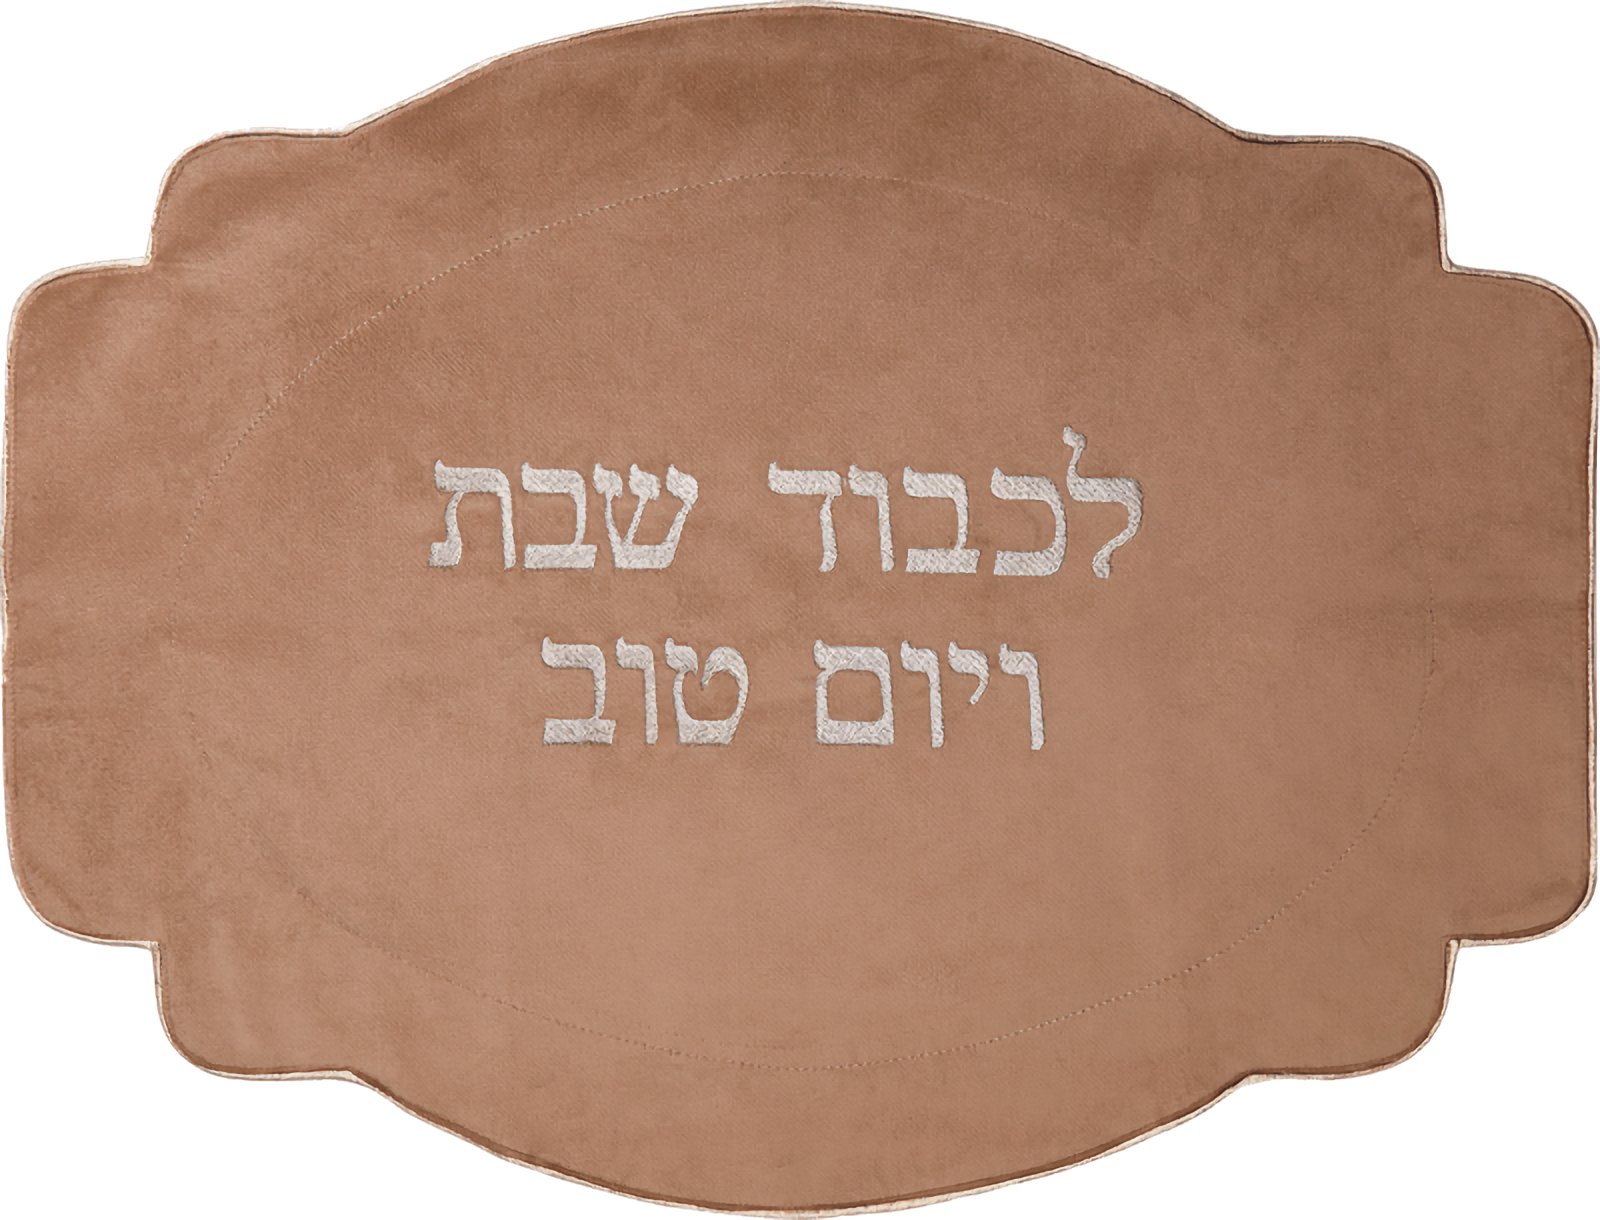 Beige velvet challah cover with silver embroidery